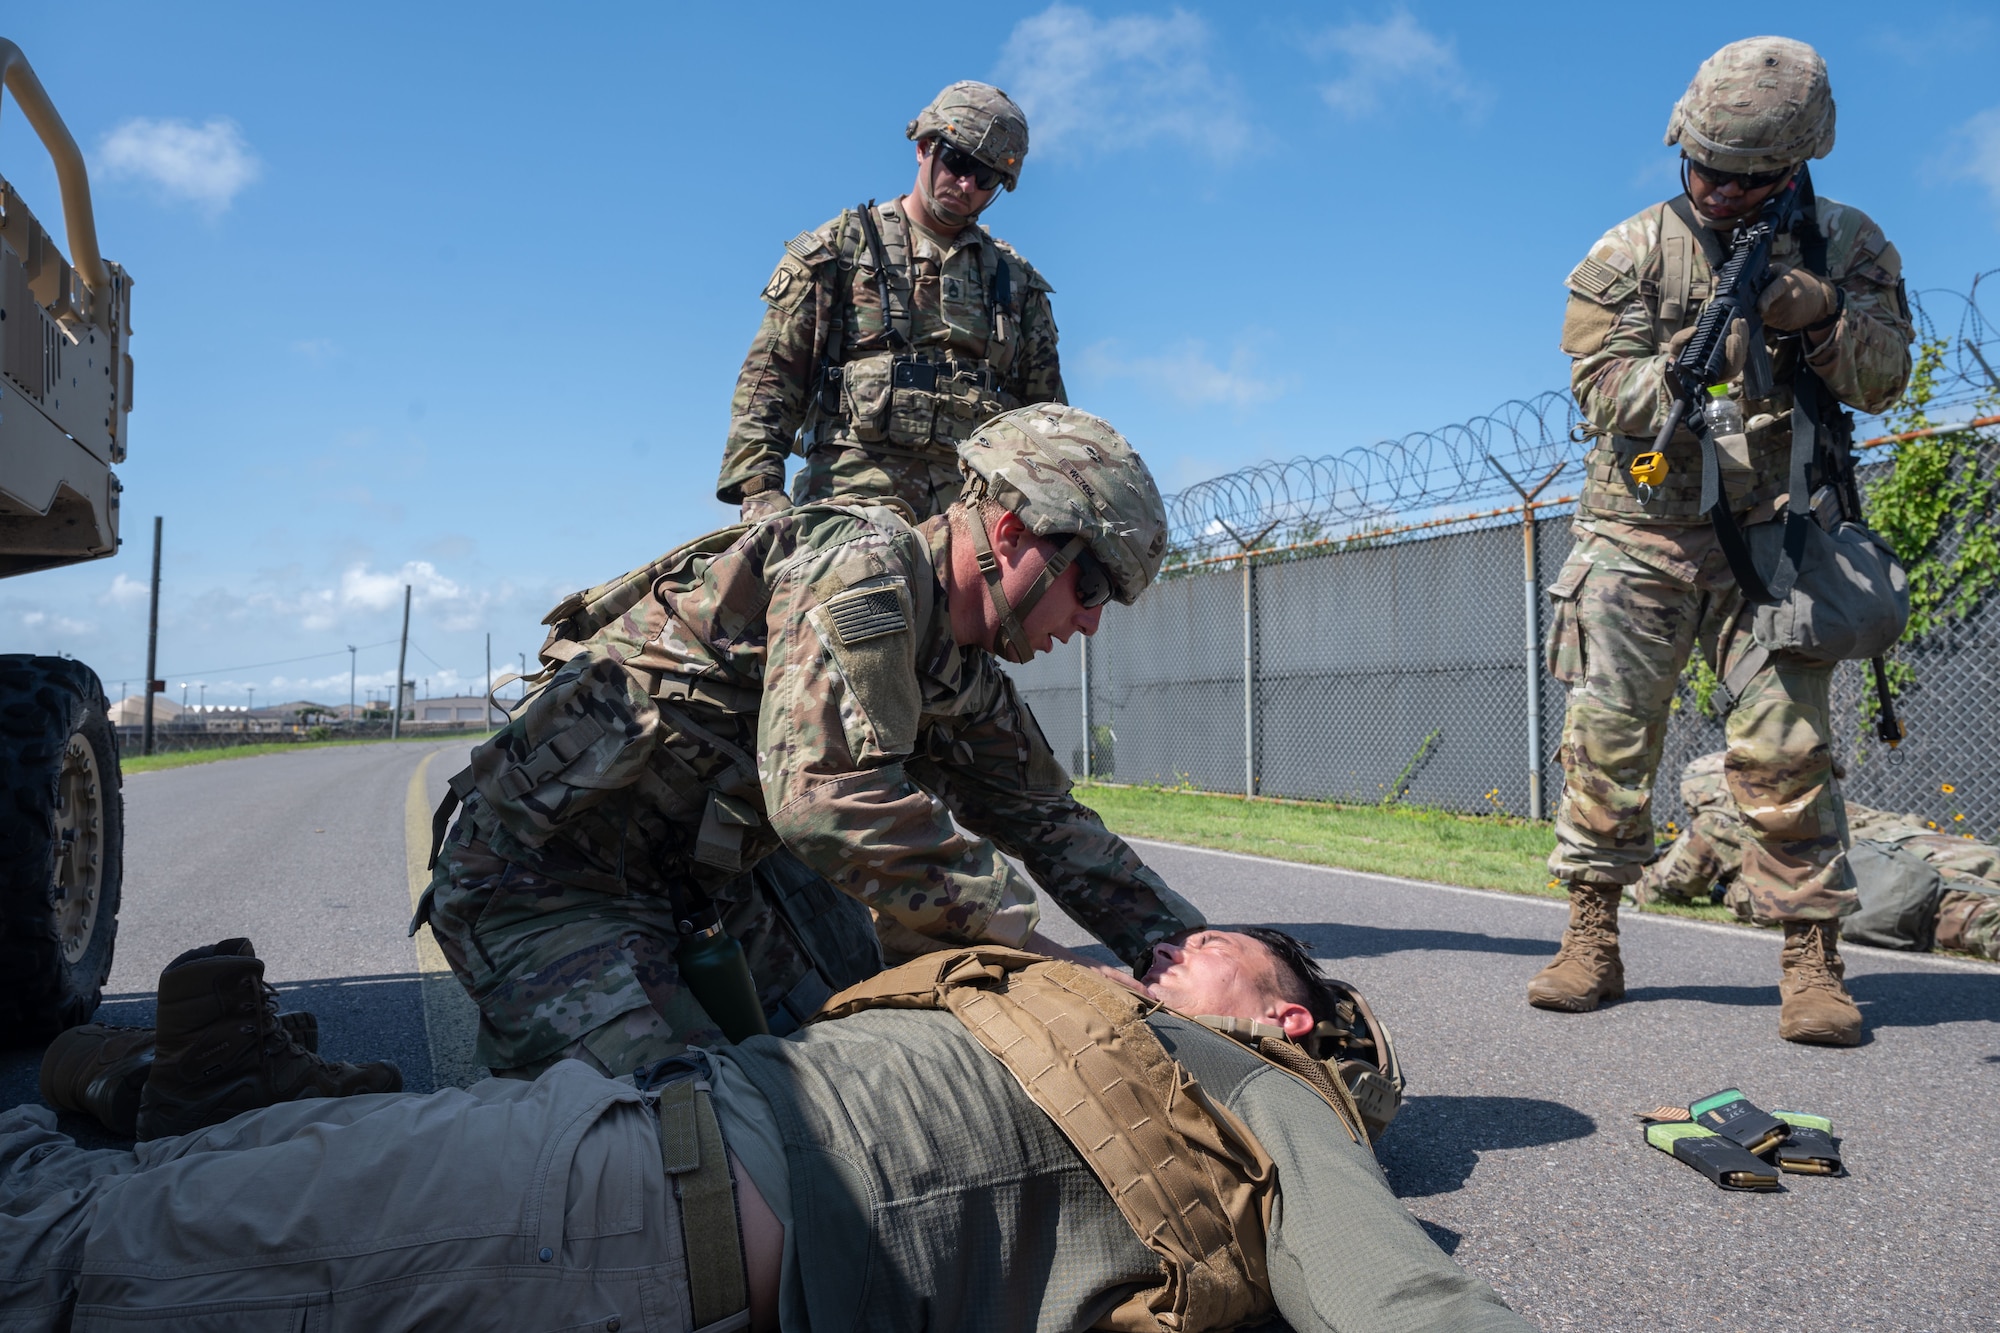 An Army Soldier applies first aid to an Air Force Airman in a simulated scenario.